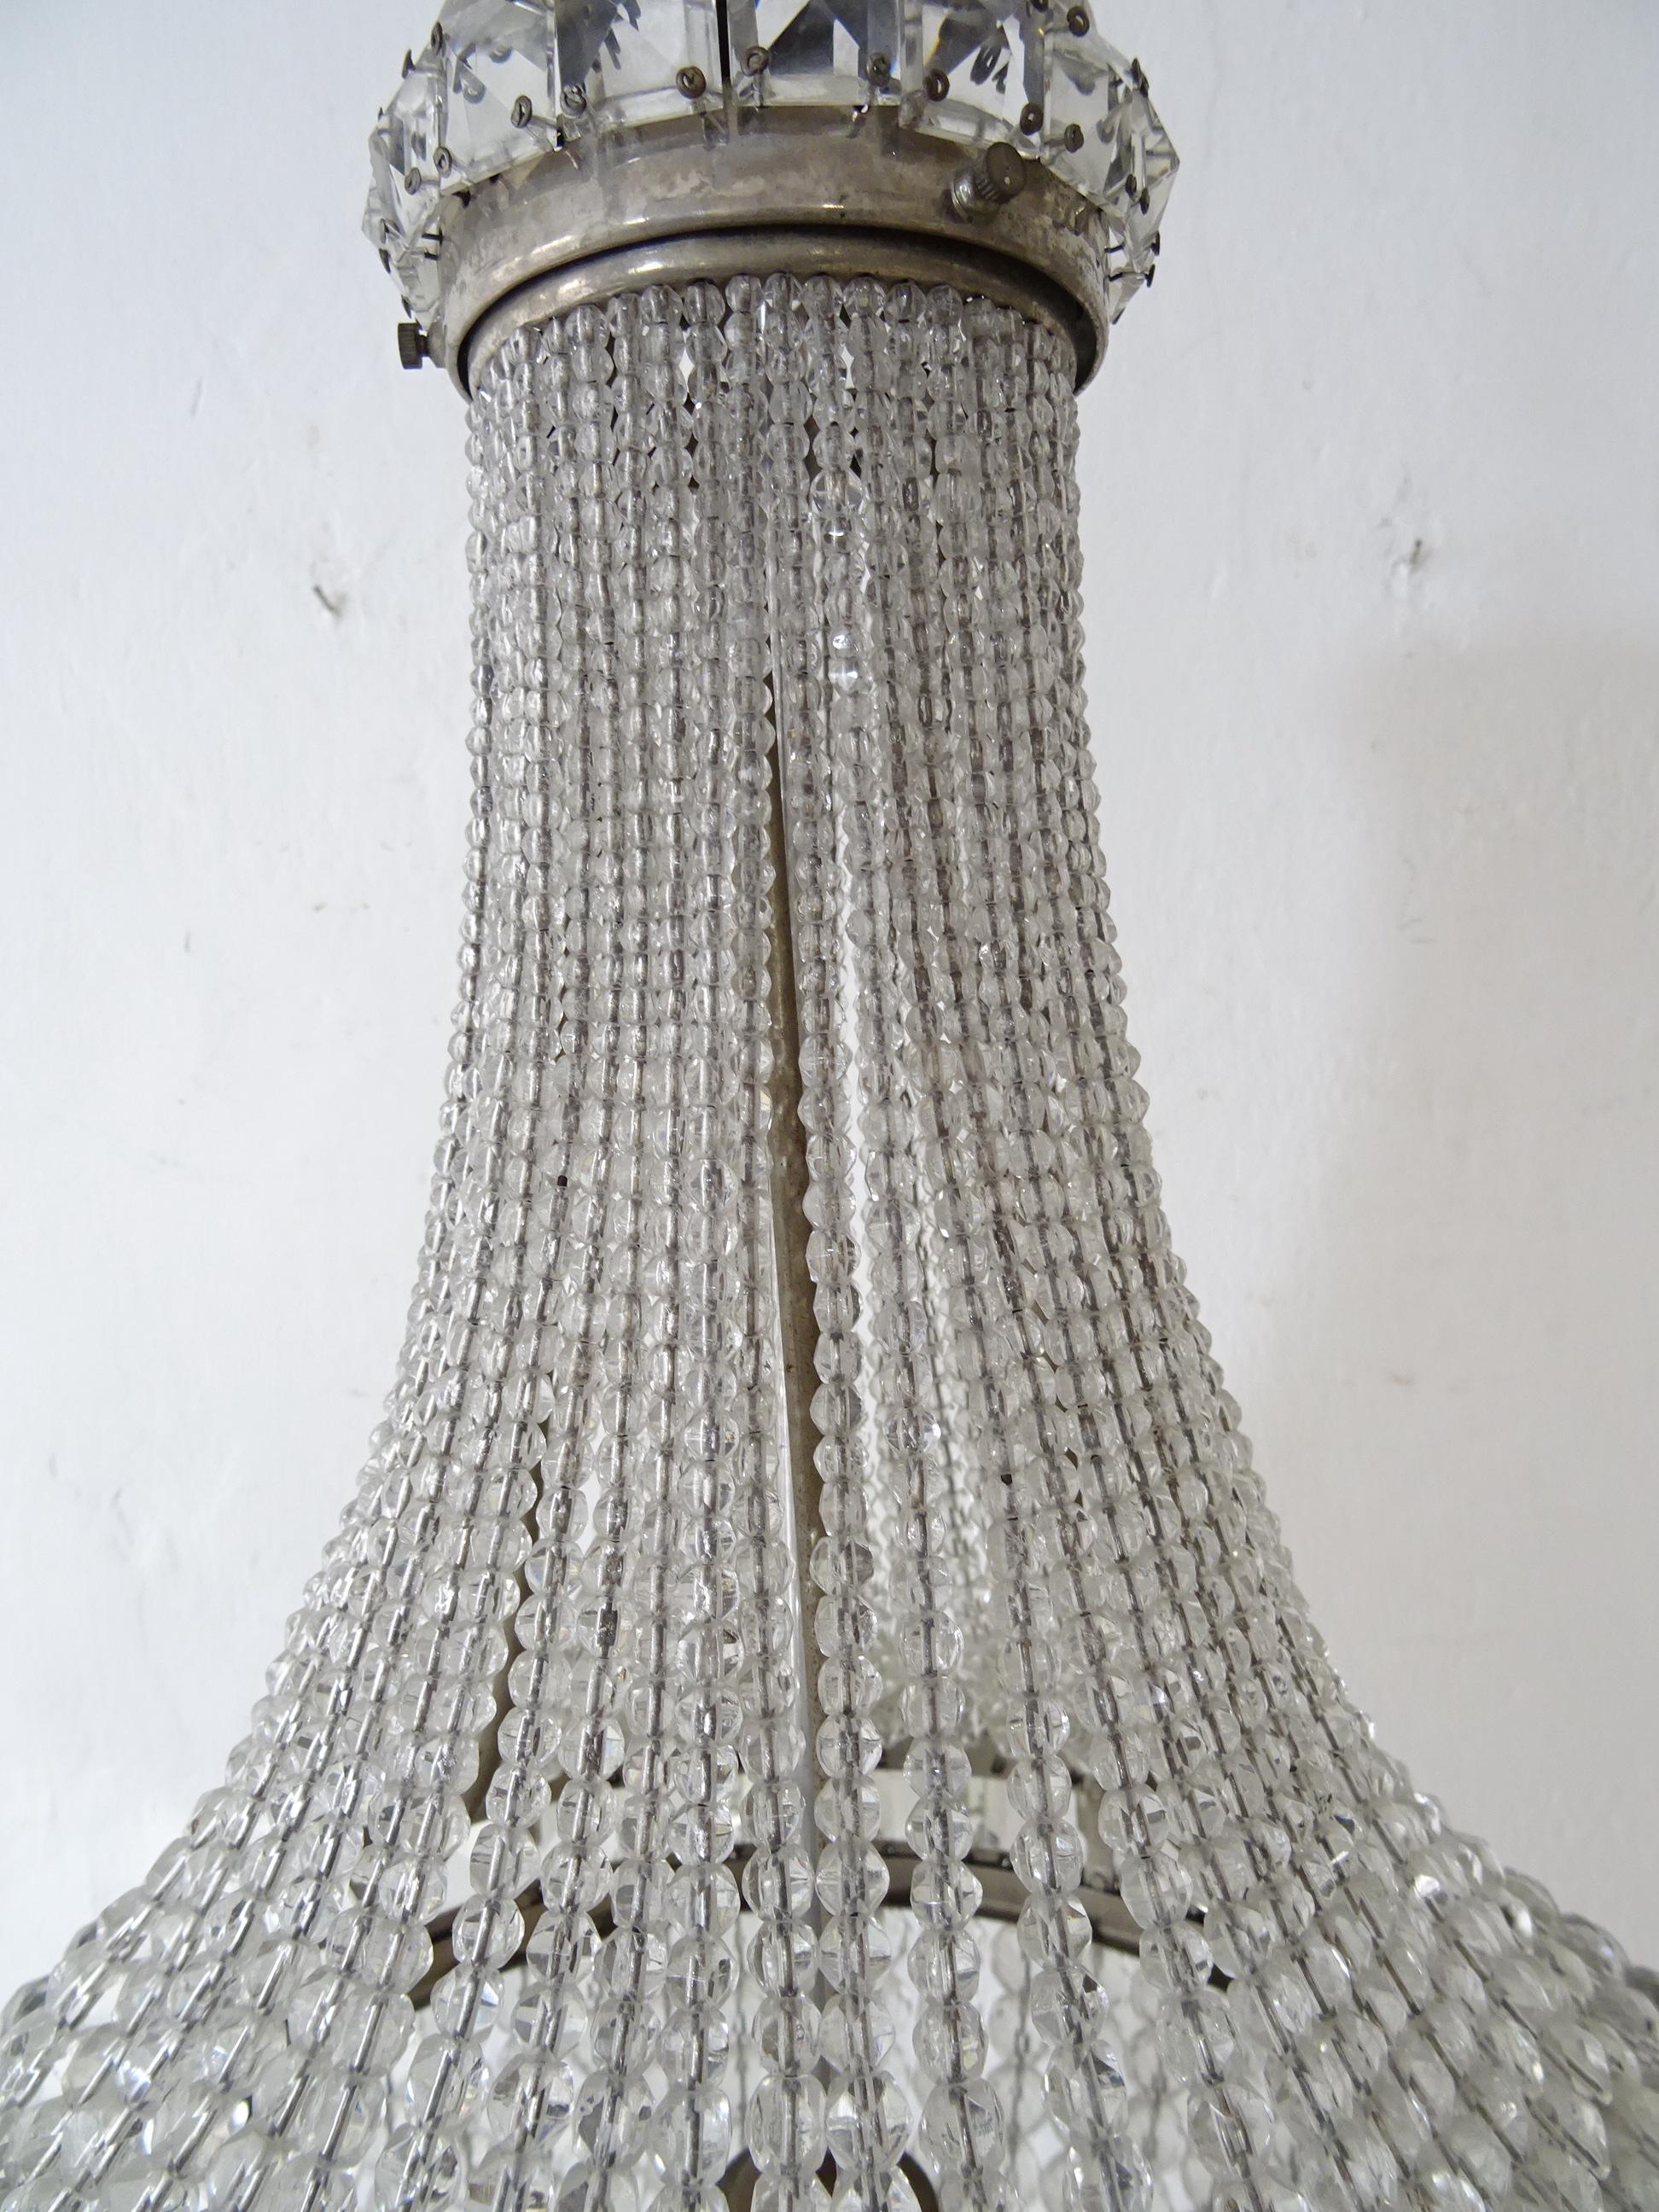 Big Crystal Beaded Empire Dome Chandelier circa 1900 In Good Condition For Sale In Firenze, Toscana